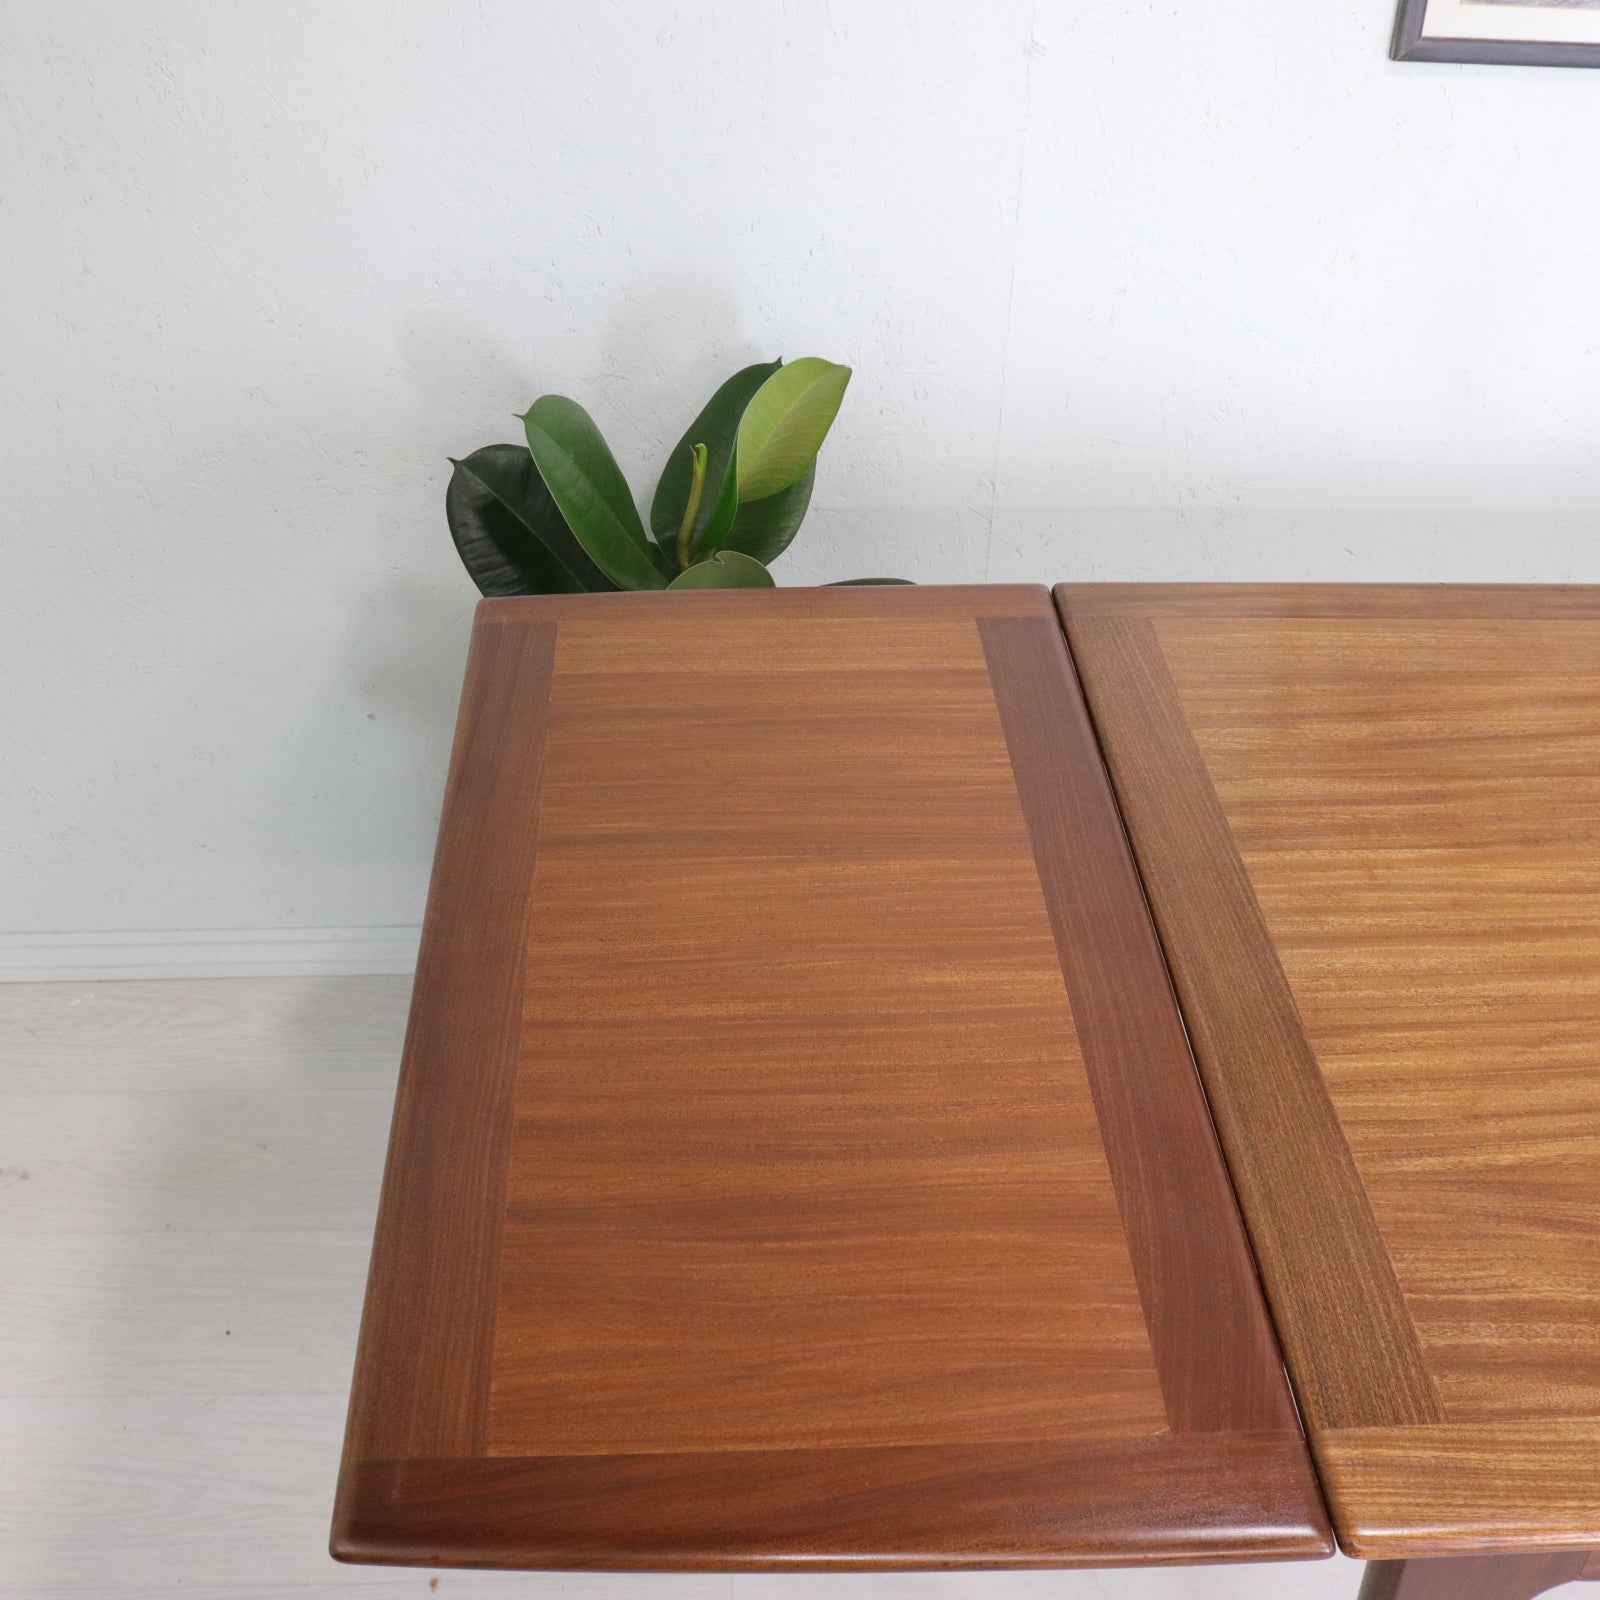 Younger Teak and Afromosia Extending Dining Table - teakyfinders